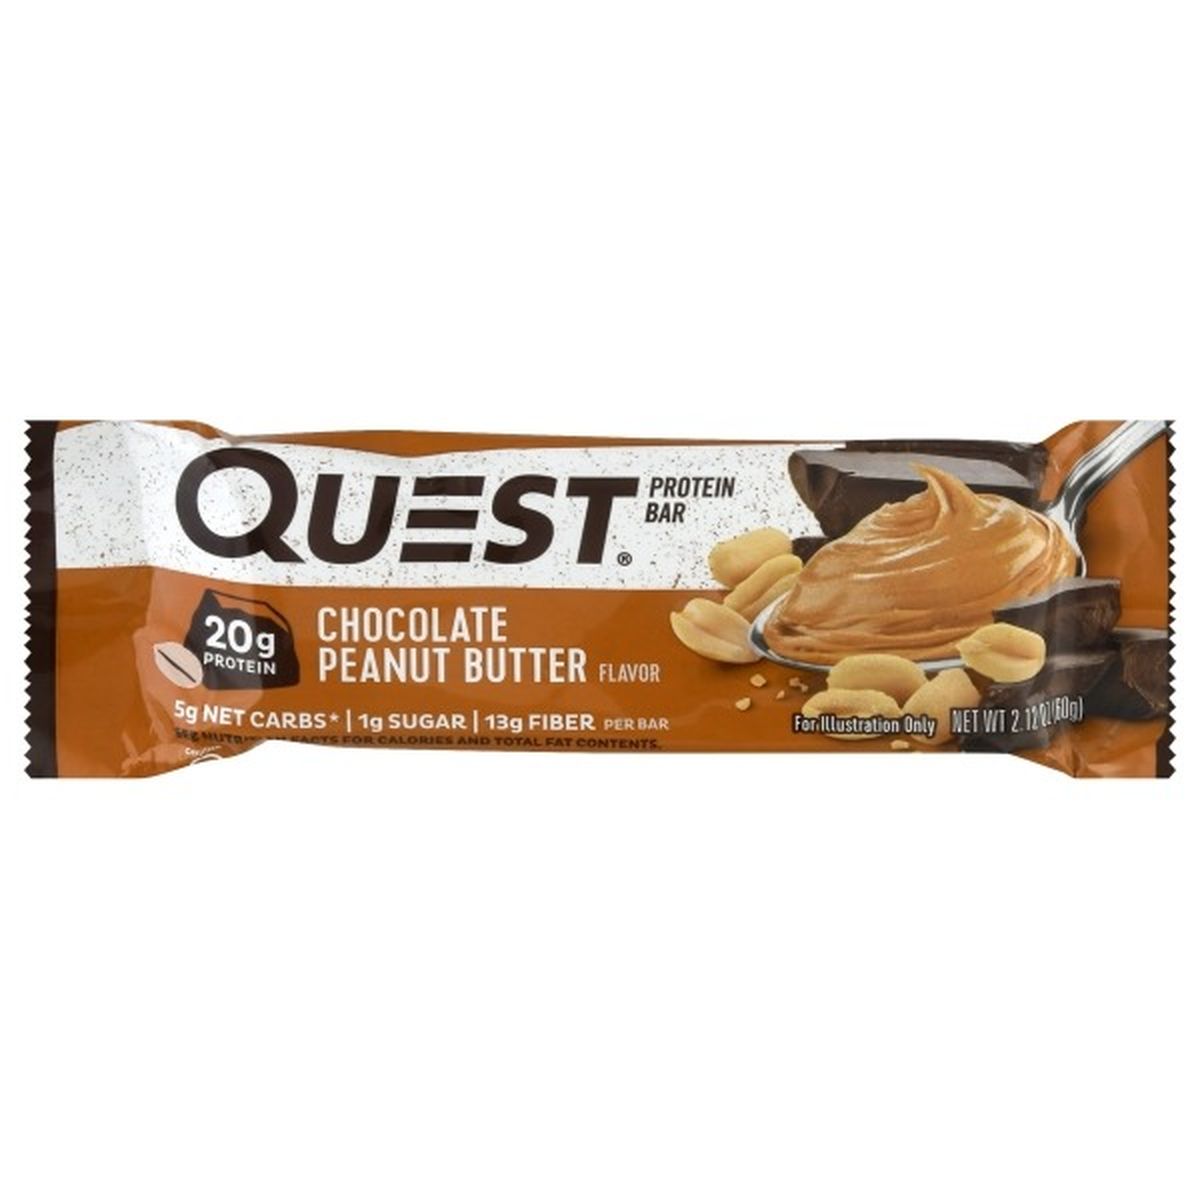 Calories in Quest Protein Bar, Chocolate Peanut Butter Flavor